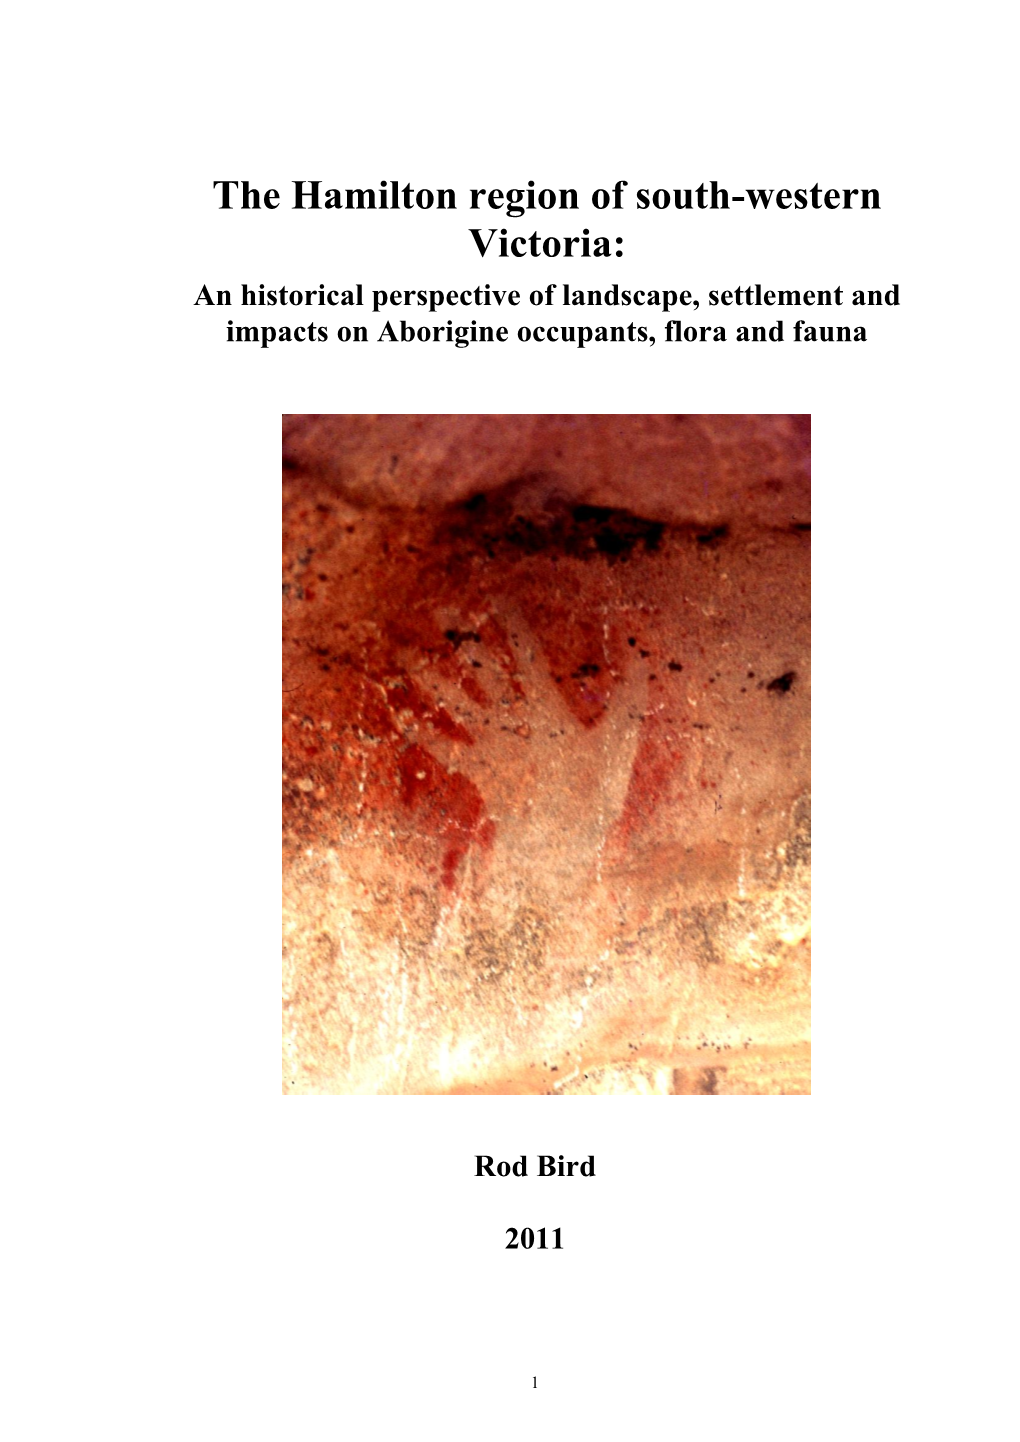 The Hamilton Region of South-Western Victoria: an Historical Perspective of Landscape, Settlement and Impacts on Aborigine Occupants, Flora and Fauna